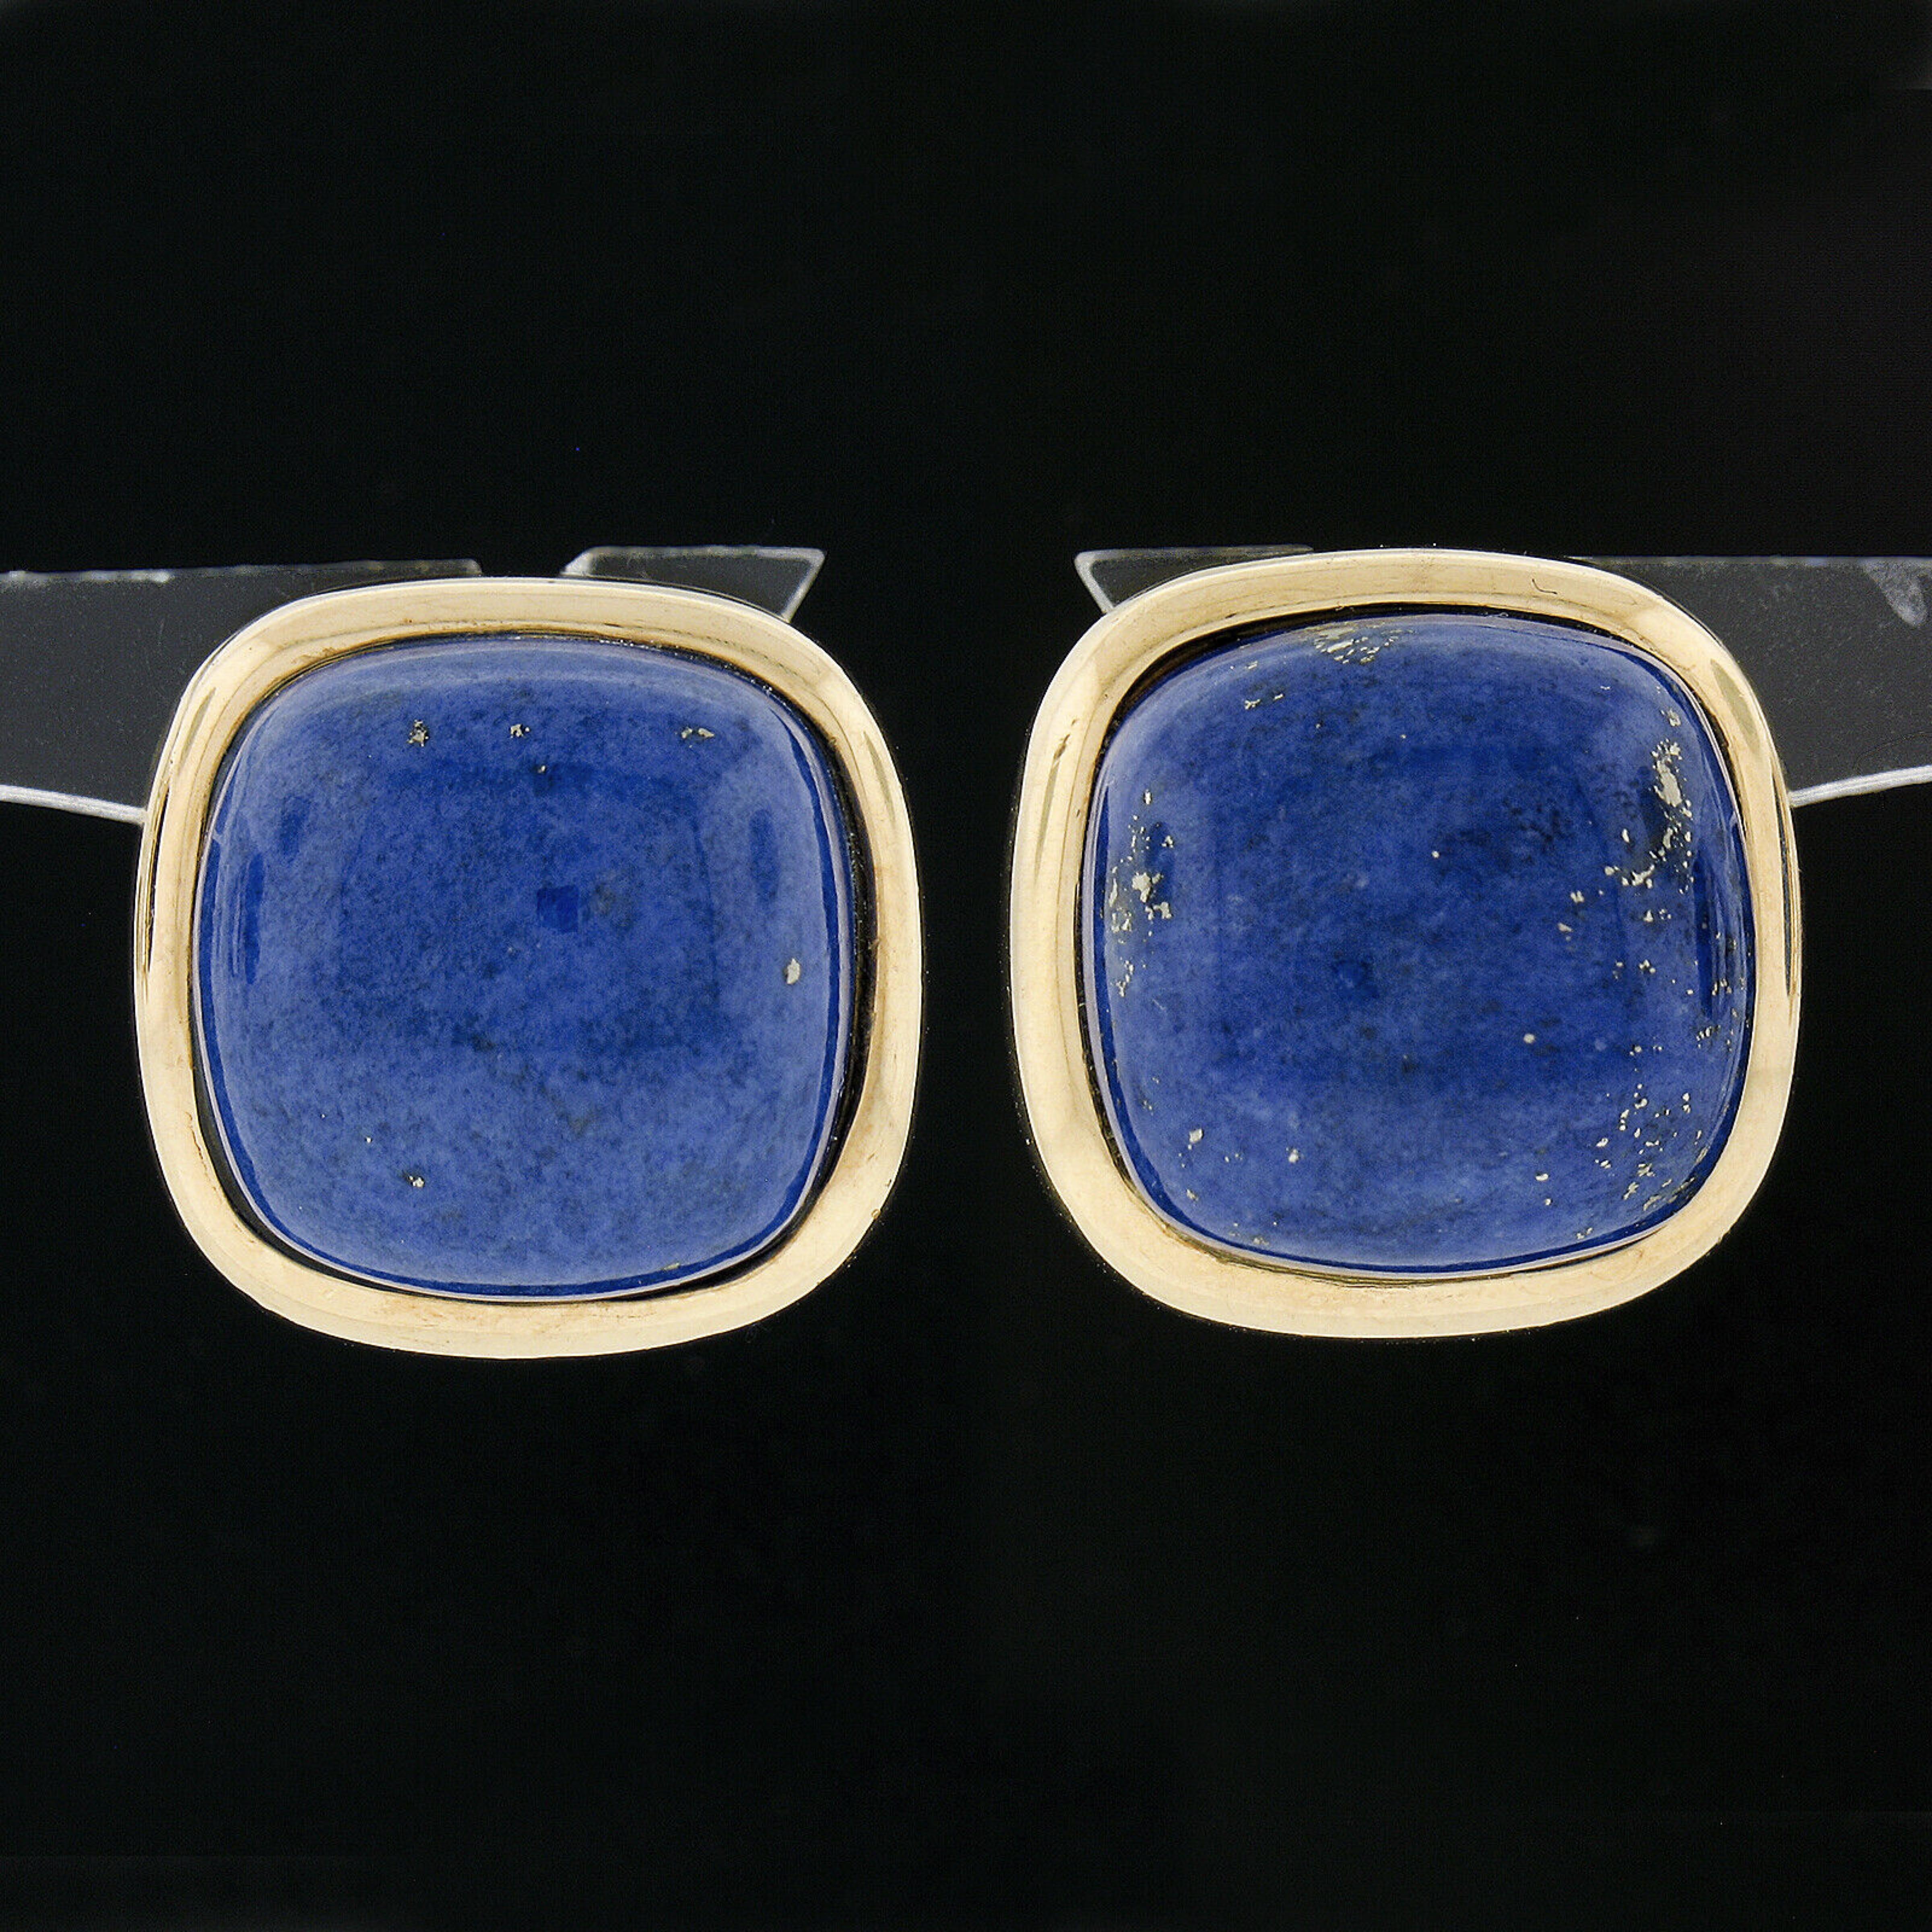 These beautiful button earrings are very well crafted in solid 14k yellow gold and feature a pair of absolutely gorgeous lapis stones. These large and very fine quality lapis are cushion cabochon cut and are neatly bezel set at the center of a high